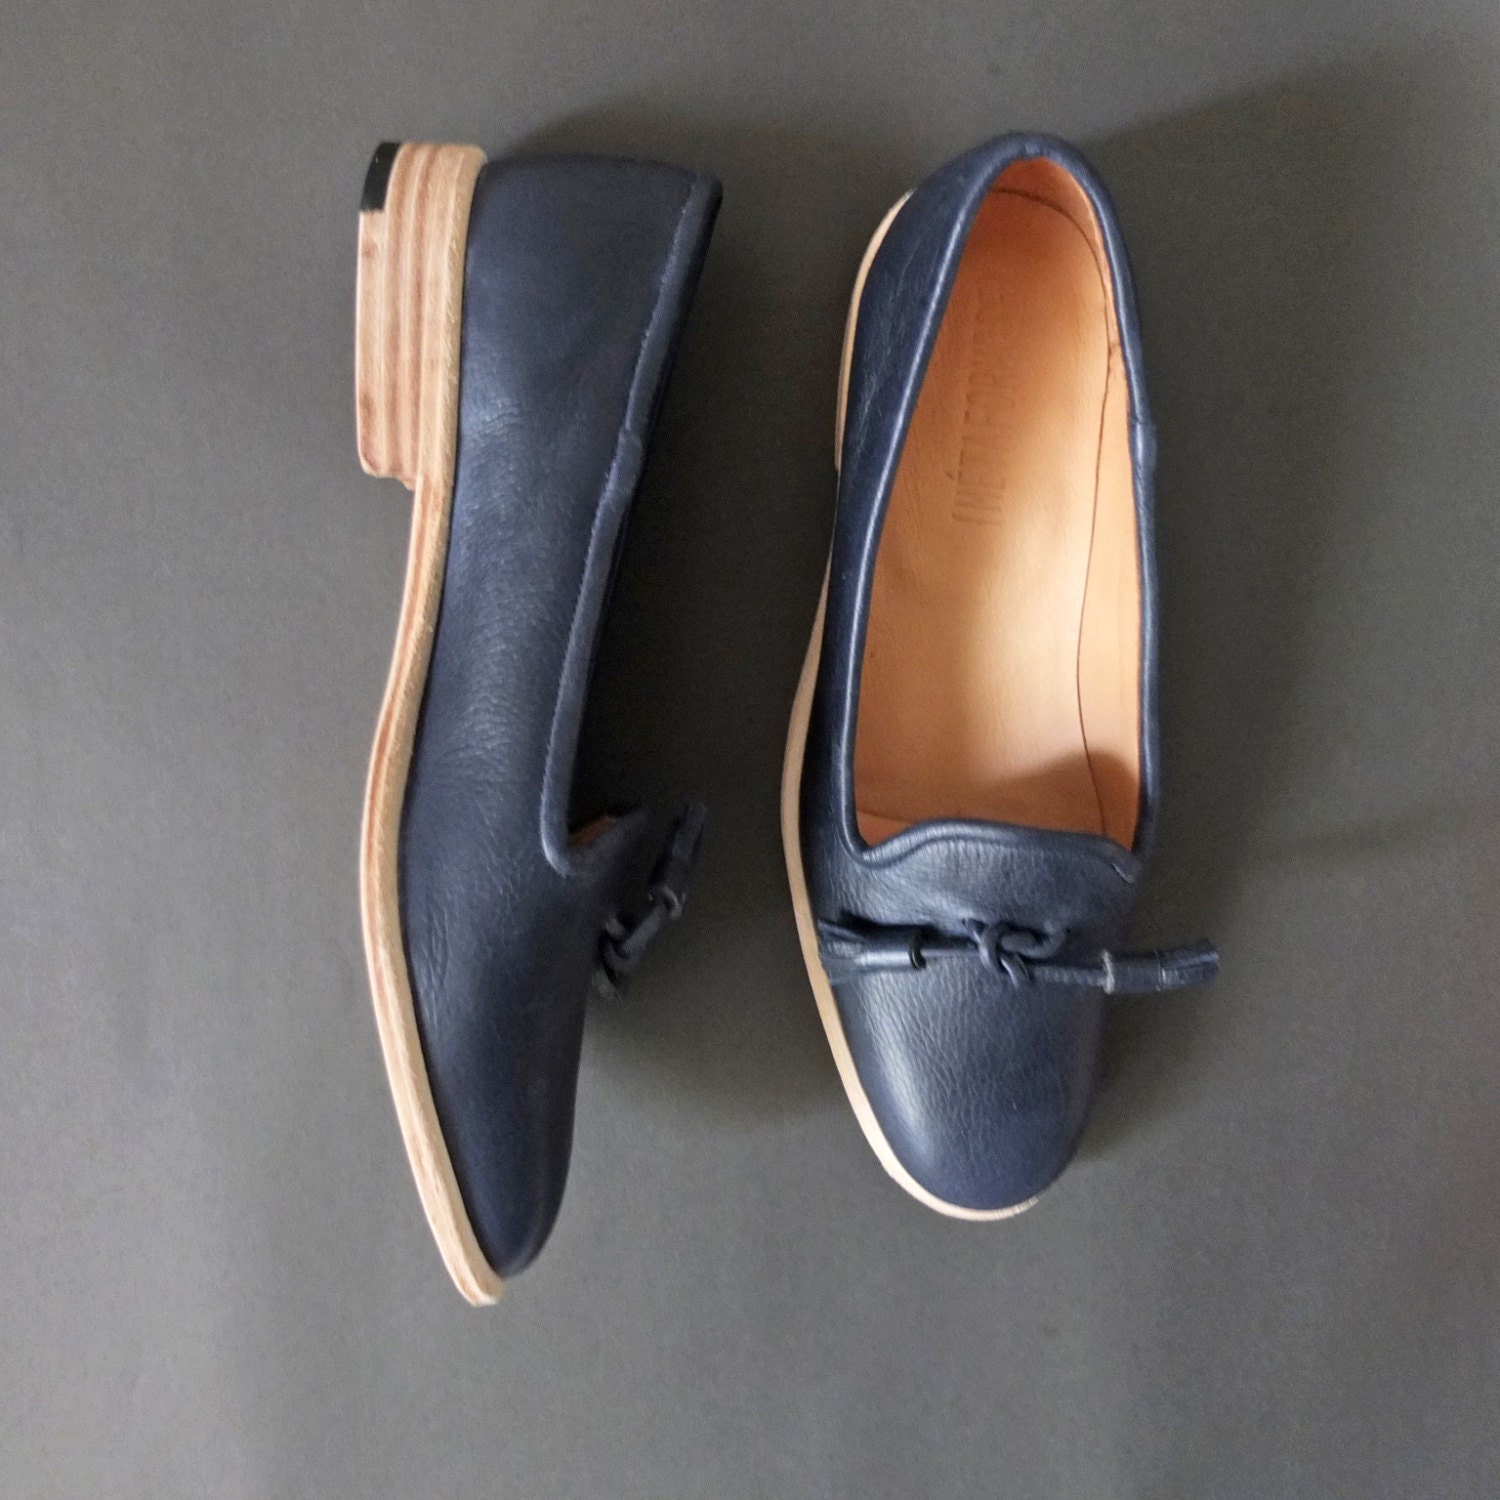 Handmade-to-order: leather loafers with tassle pompoms